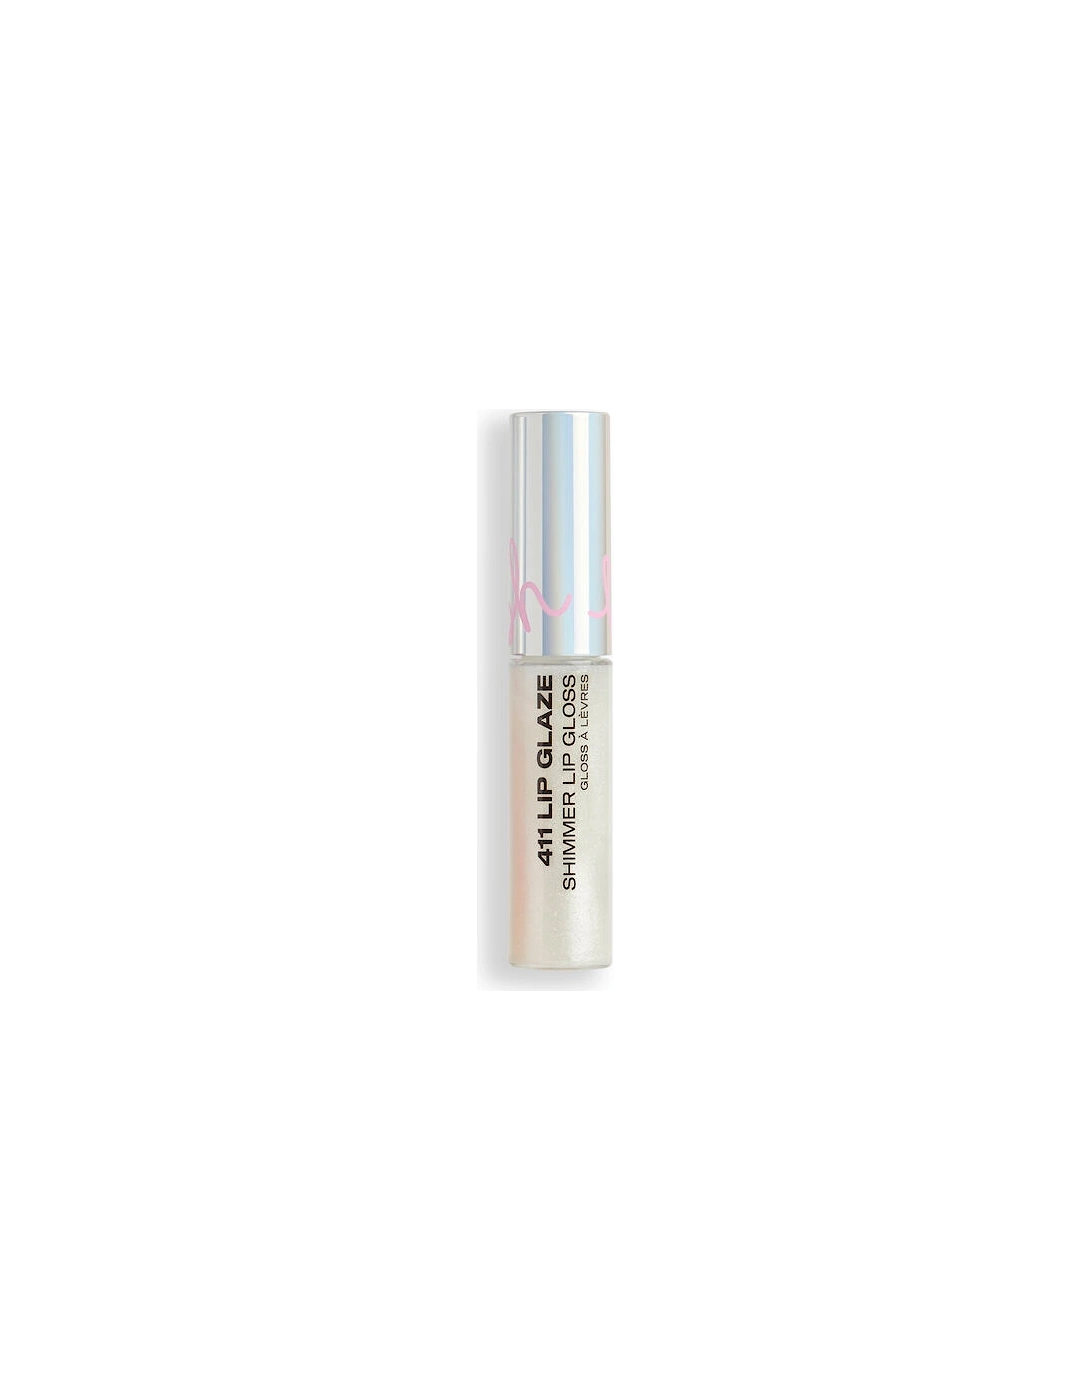 BH 411 Lip Glaze Shimmer Gloss Papped, 2 of 1